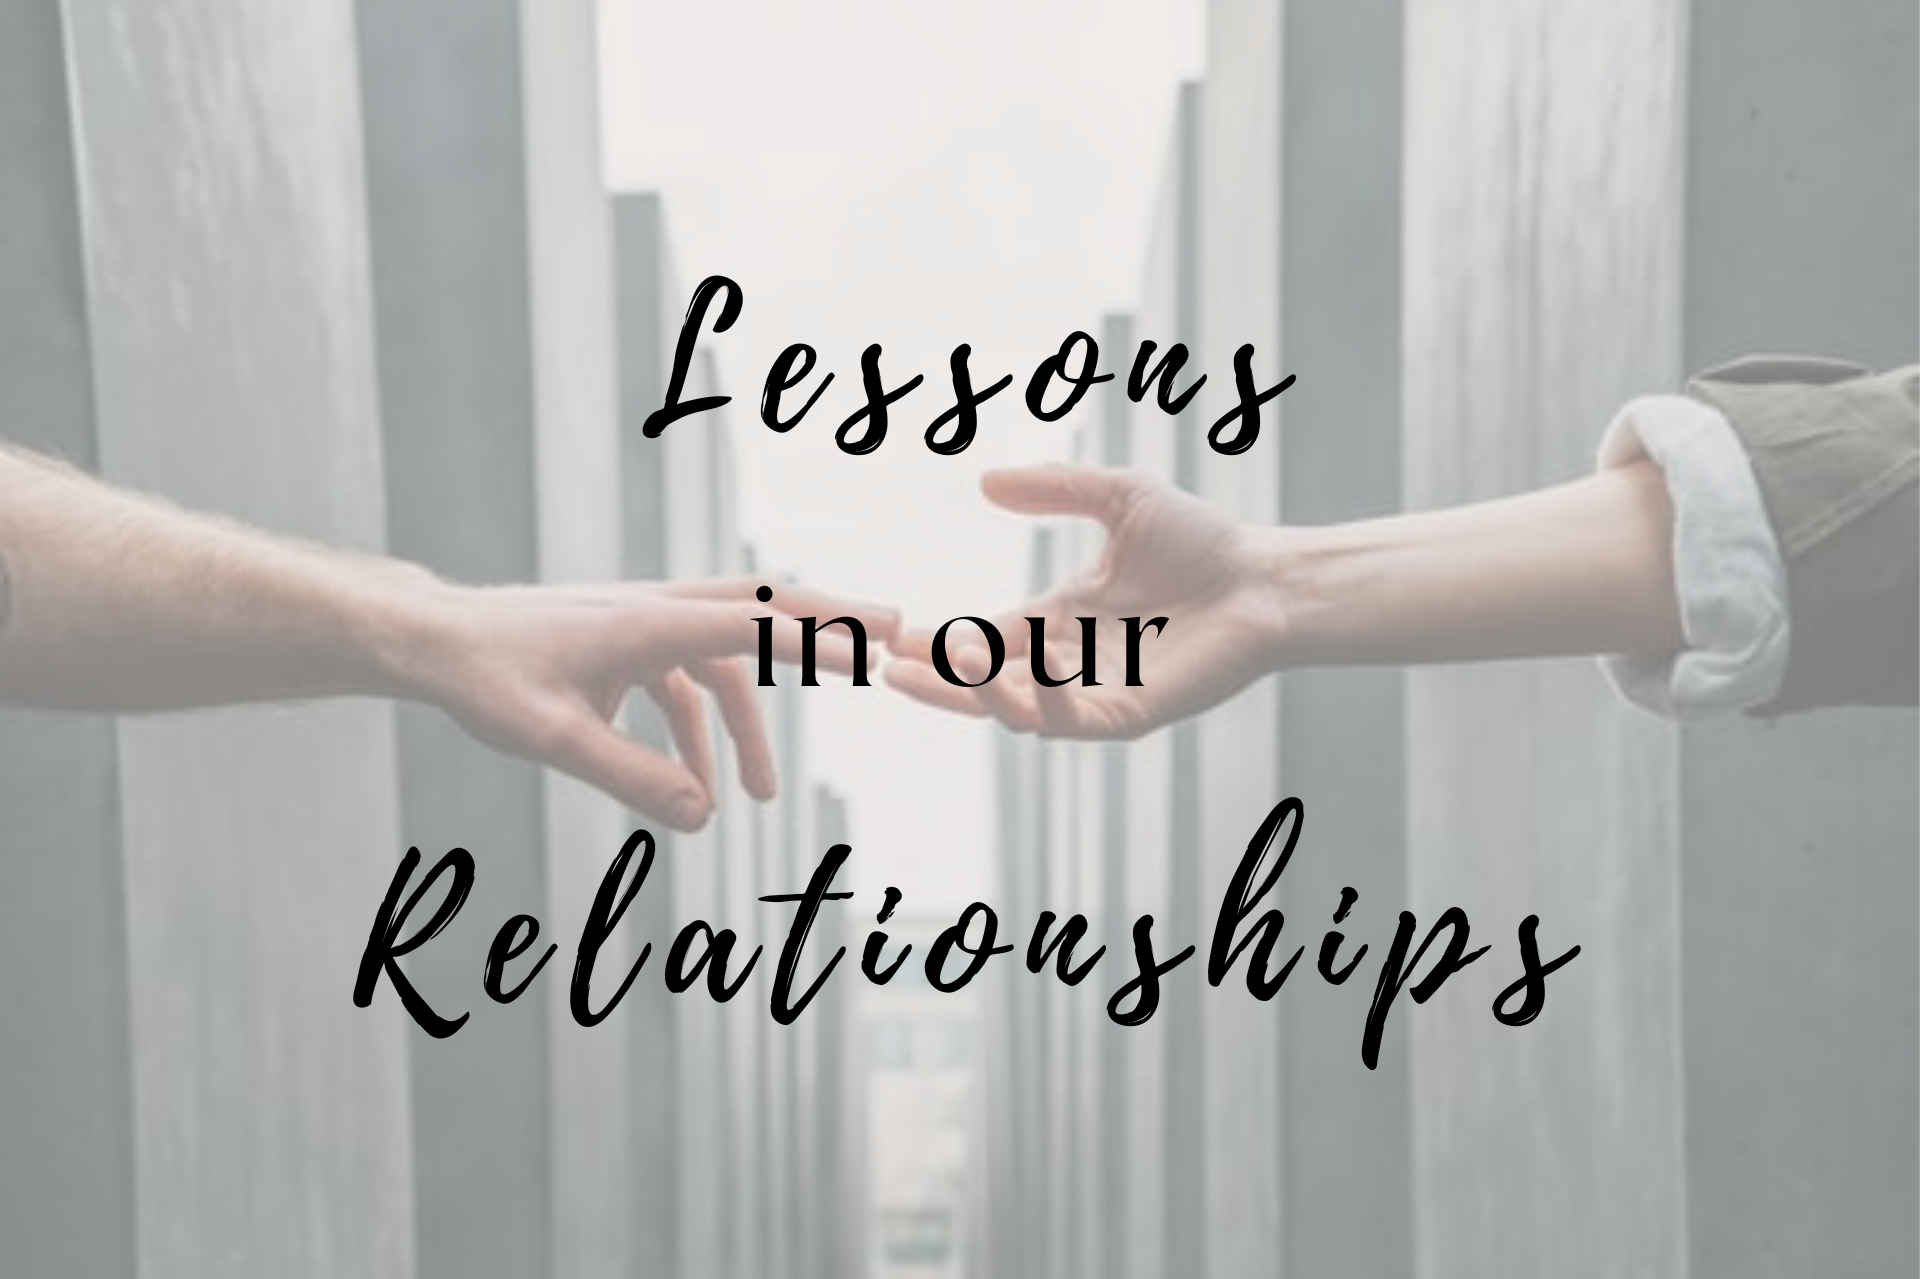 Lessons in our relationships